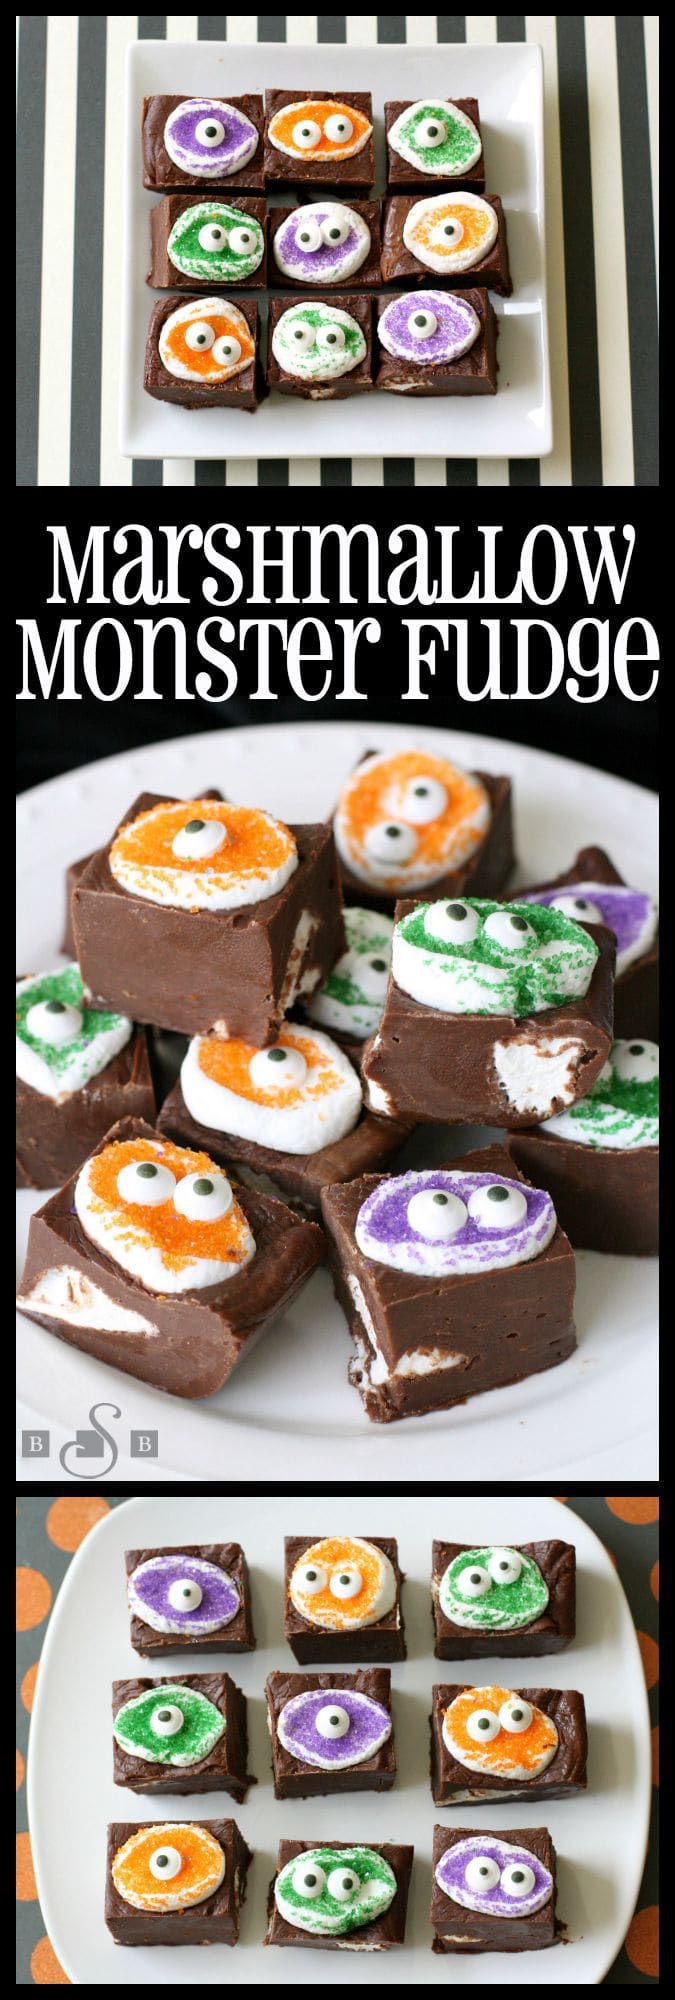 Marshmallow Monster Fudge takes a simple and delicious fudge recipe, and adds these adorable monster faces to the top to make an easy and cute Halloween treat!